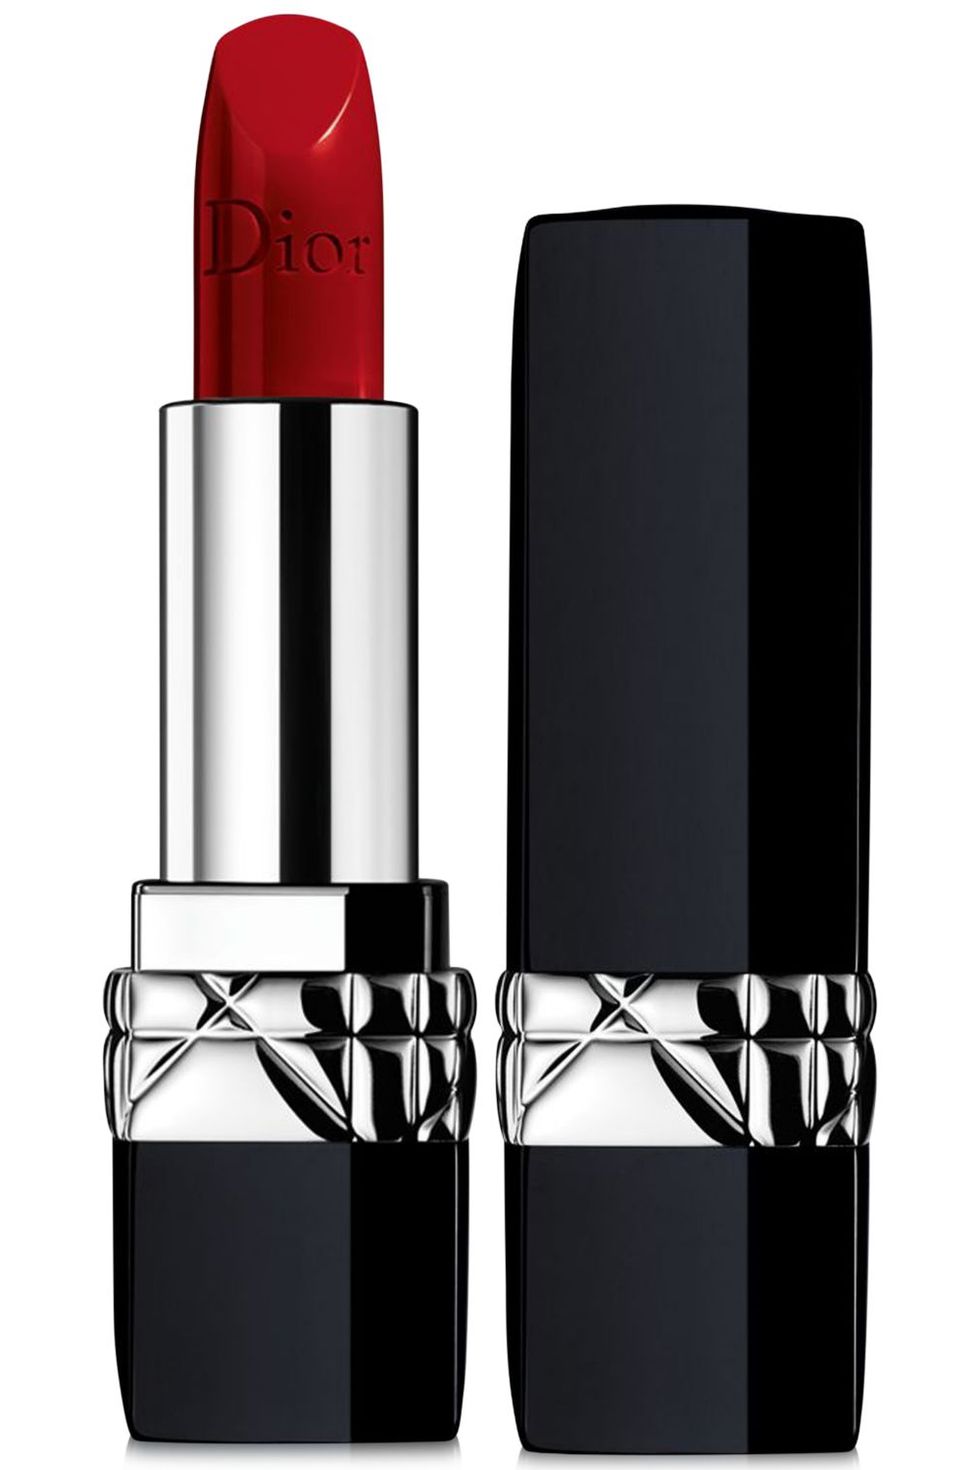 red lip color in the shade 999 by Dior | Wedifys